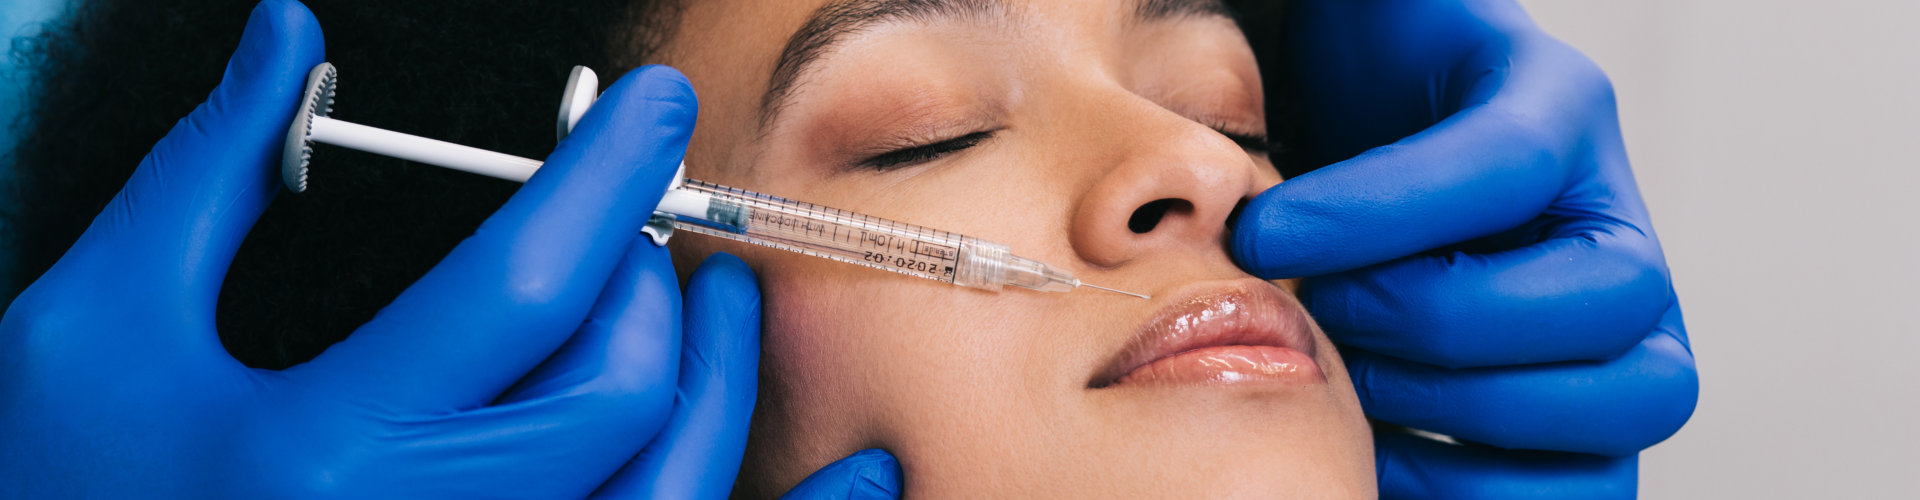 woman having botox tratment with injection